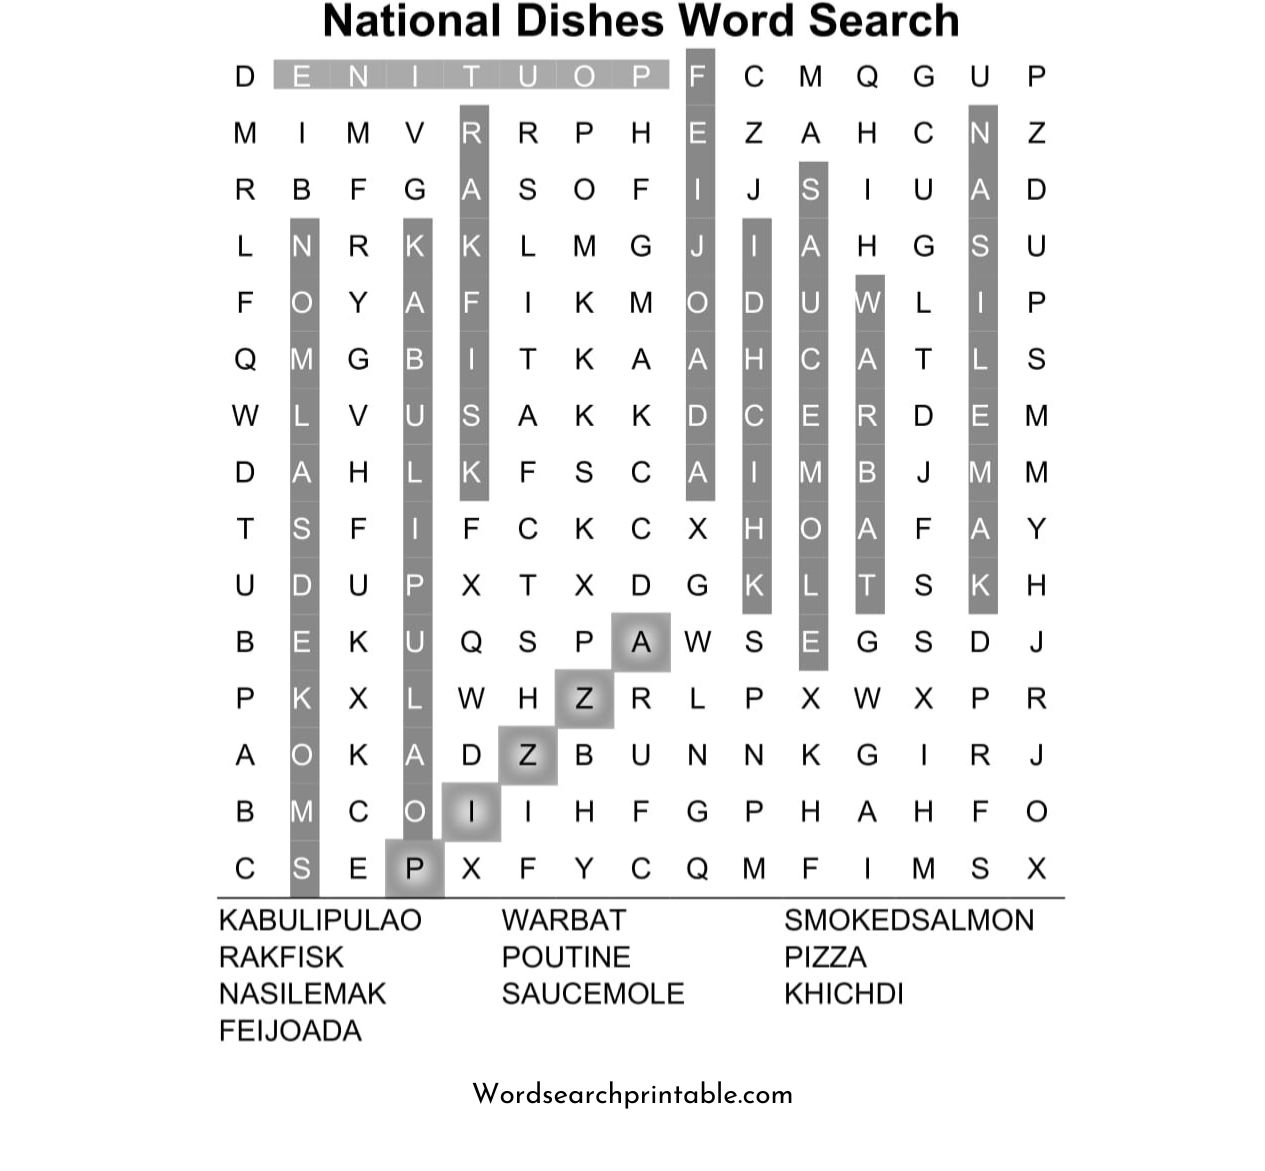 national dishes word search puzzle solution